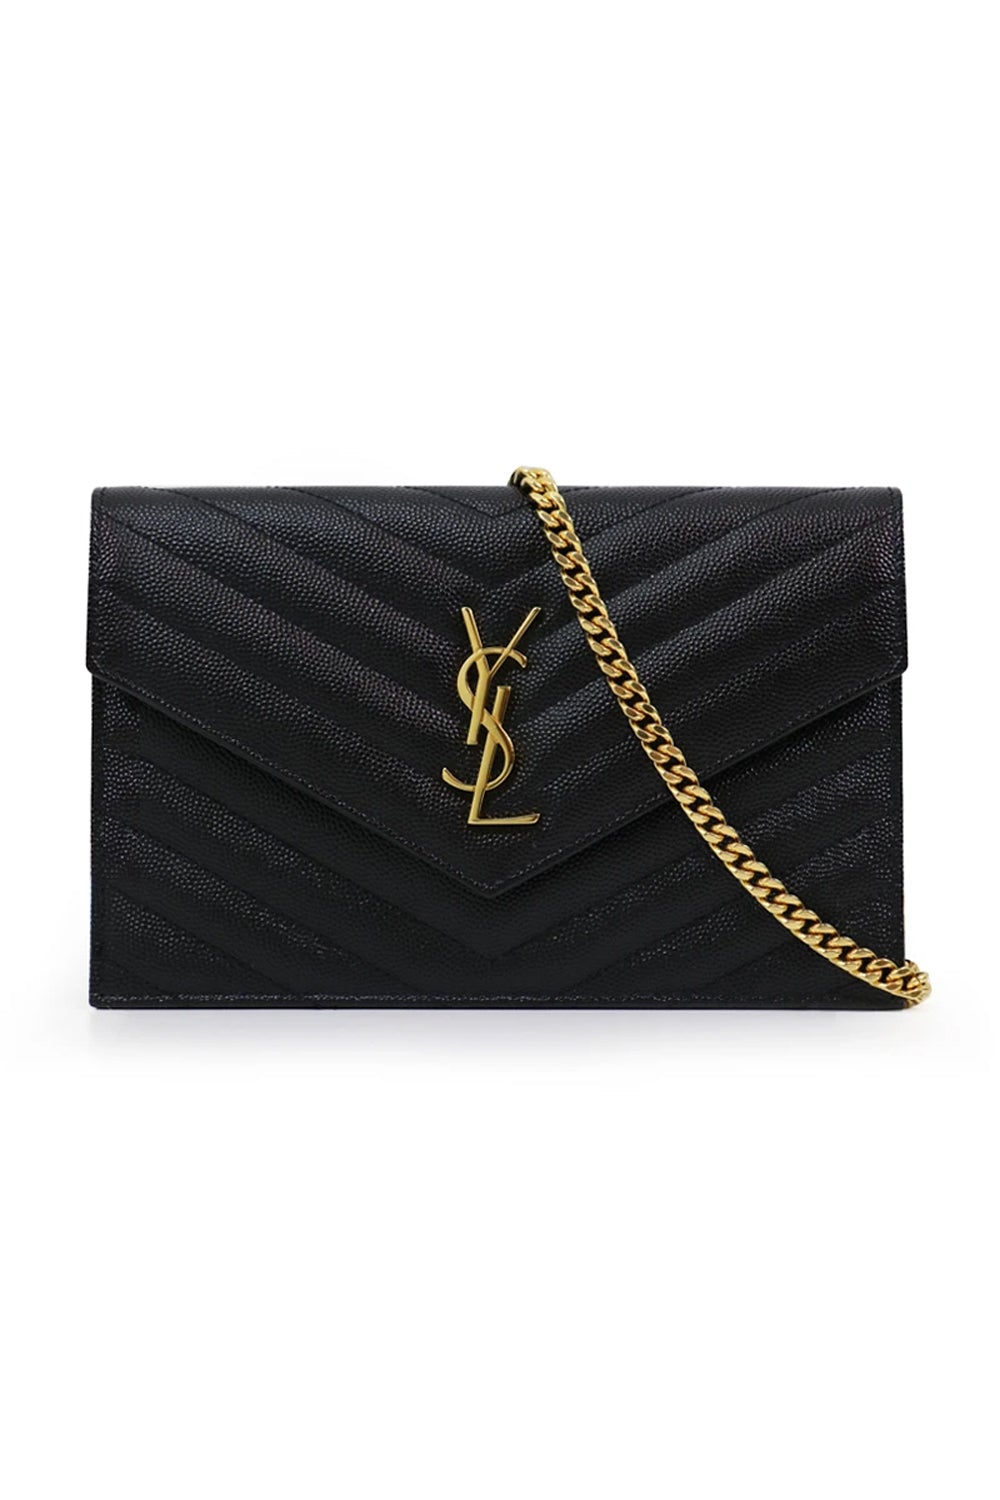 YSL Large WOC Pale Pink in gold hardware, Luxury, Bags & Wallets